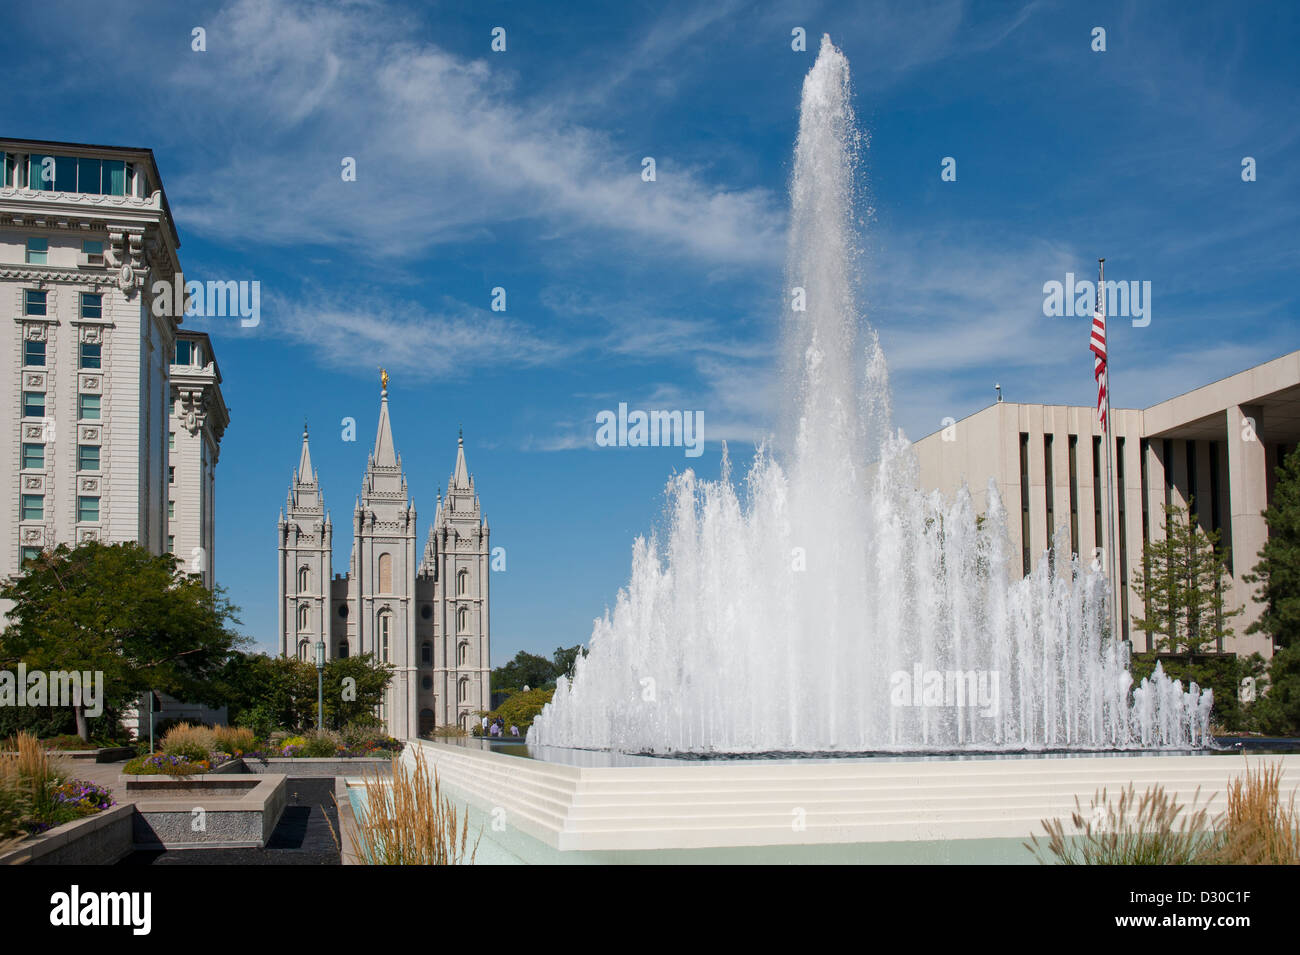 The largest temple of the Mormon church, the temple in downtown Salt Lake City, Utah sits next to their int'l headquarters. Stock Photo